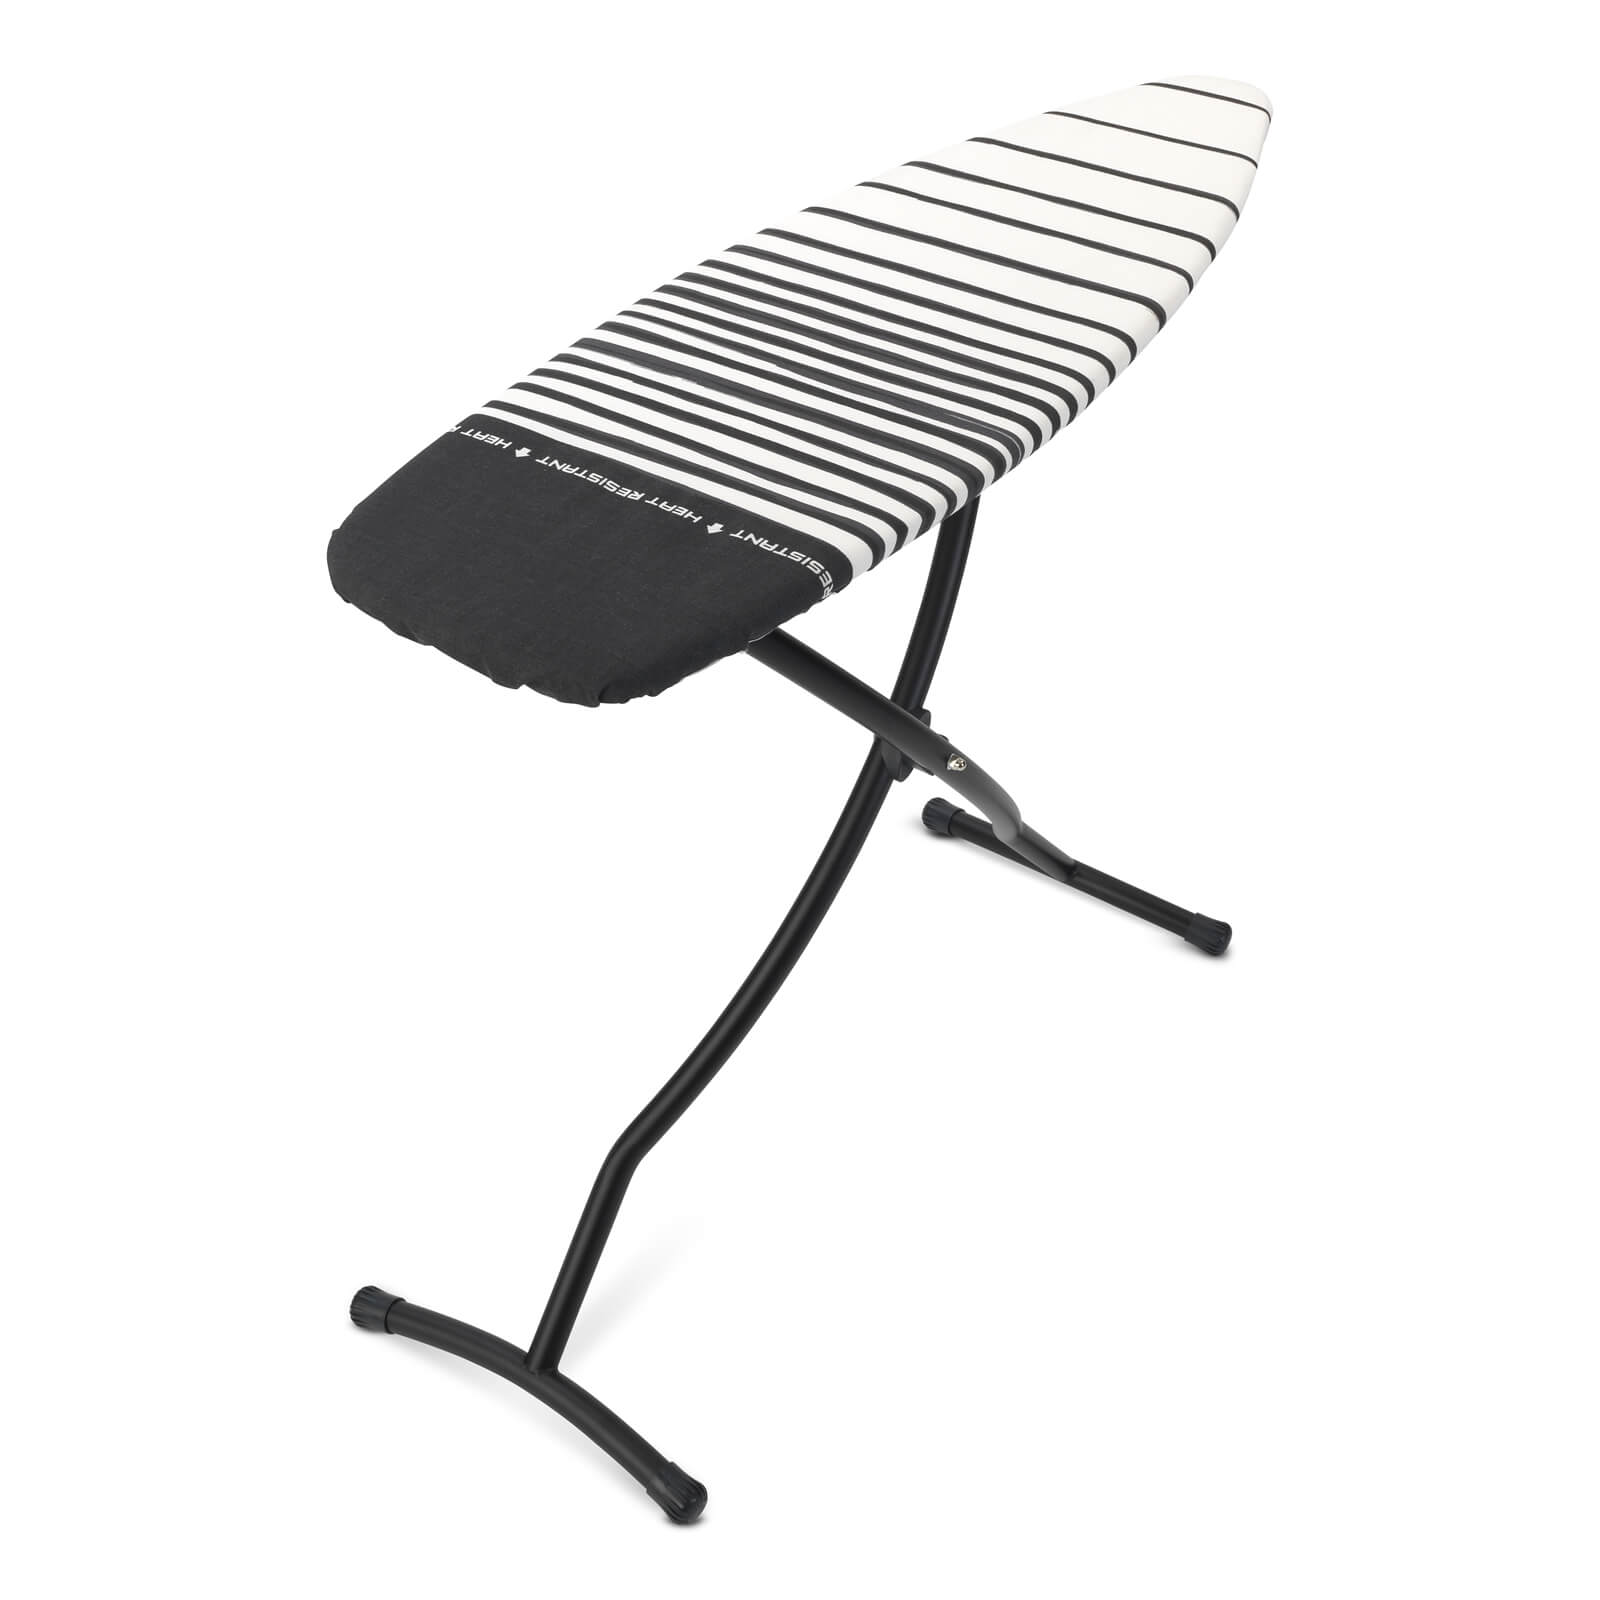 Brabantia - Extra Large Ironing Board - Size D - with heat resistant zone